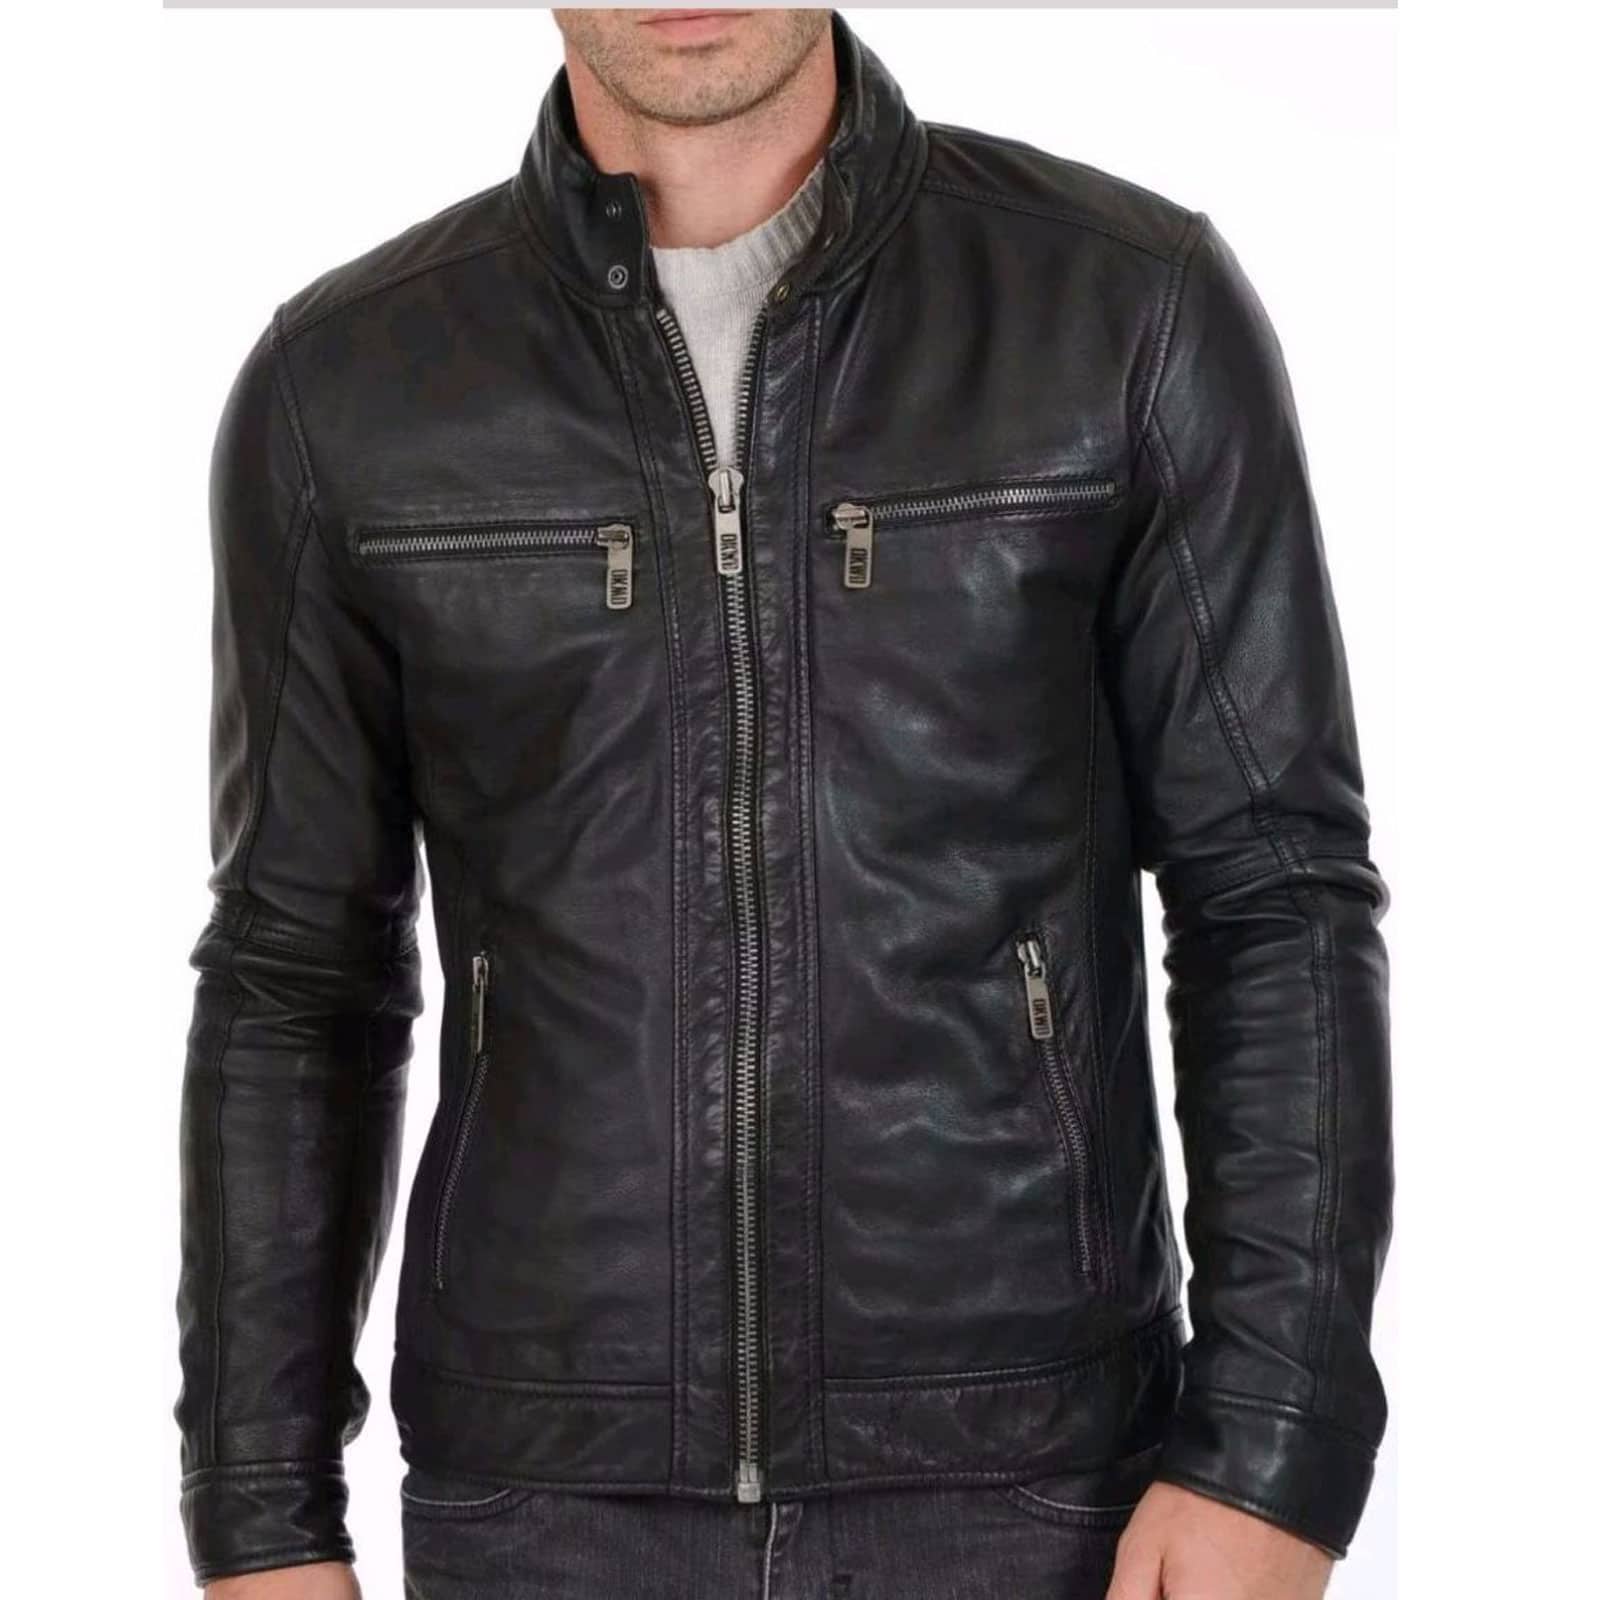 Buy Biker Leather Jacket with Snap Closure - Jackets for Men 0075 ...